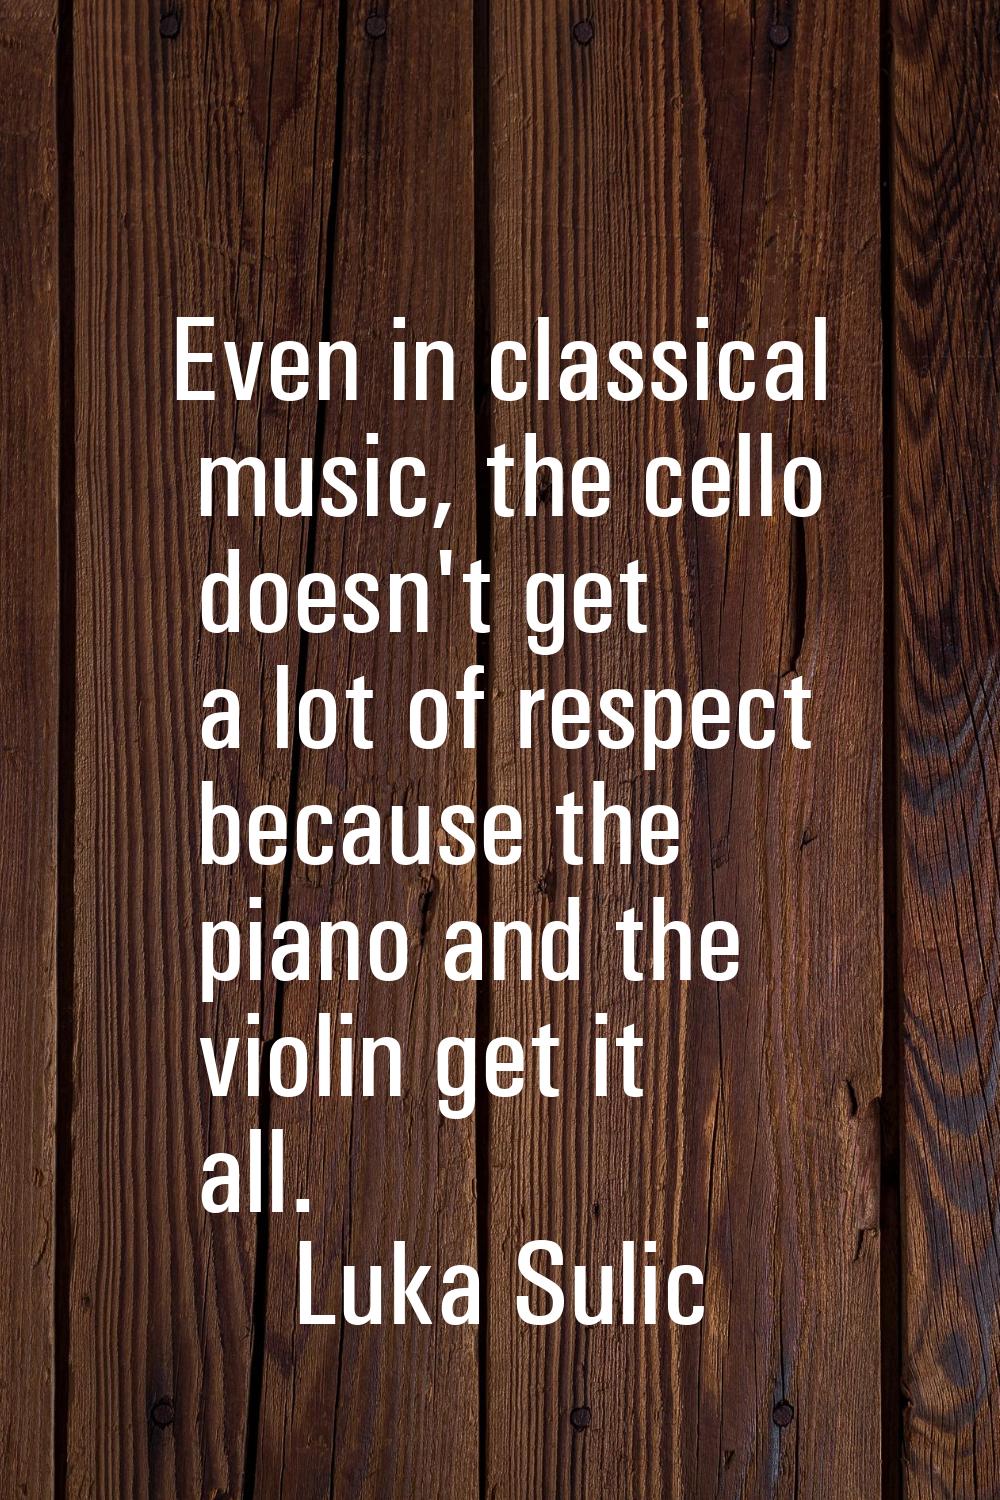 Even in classical music, the cello doesn't get a lot of respect because the piano and the violin ge